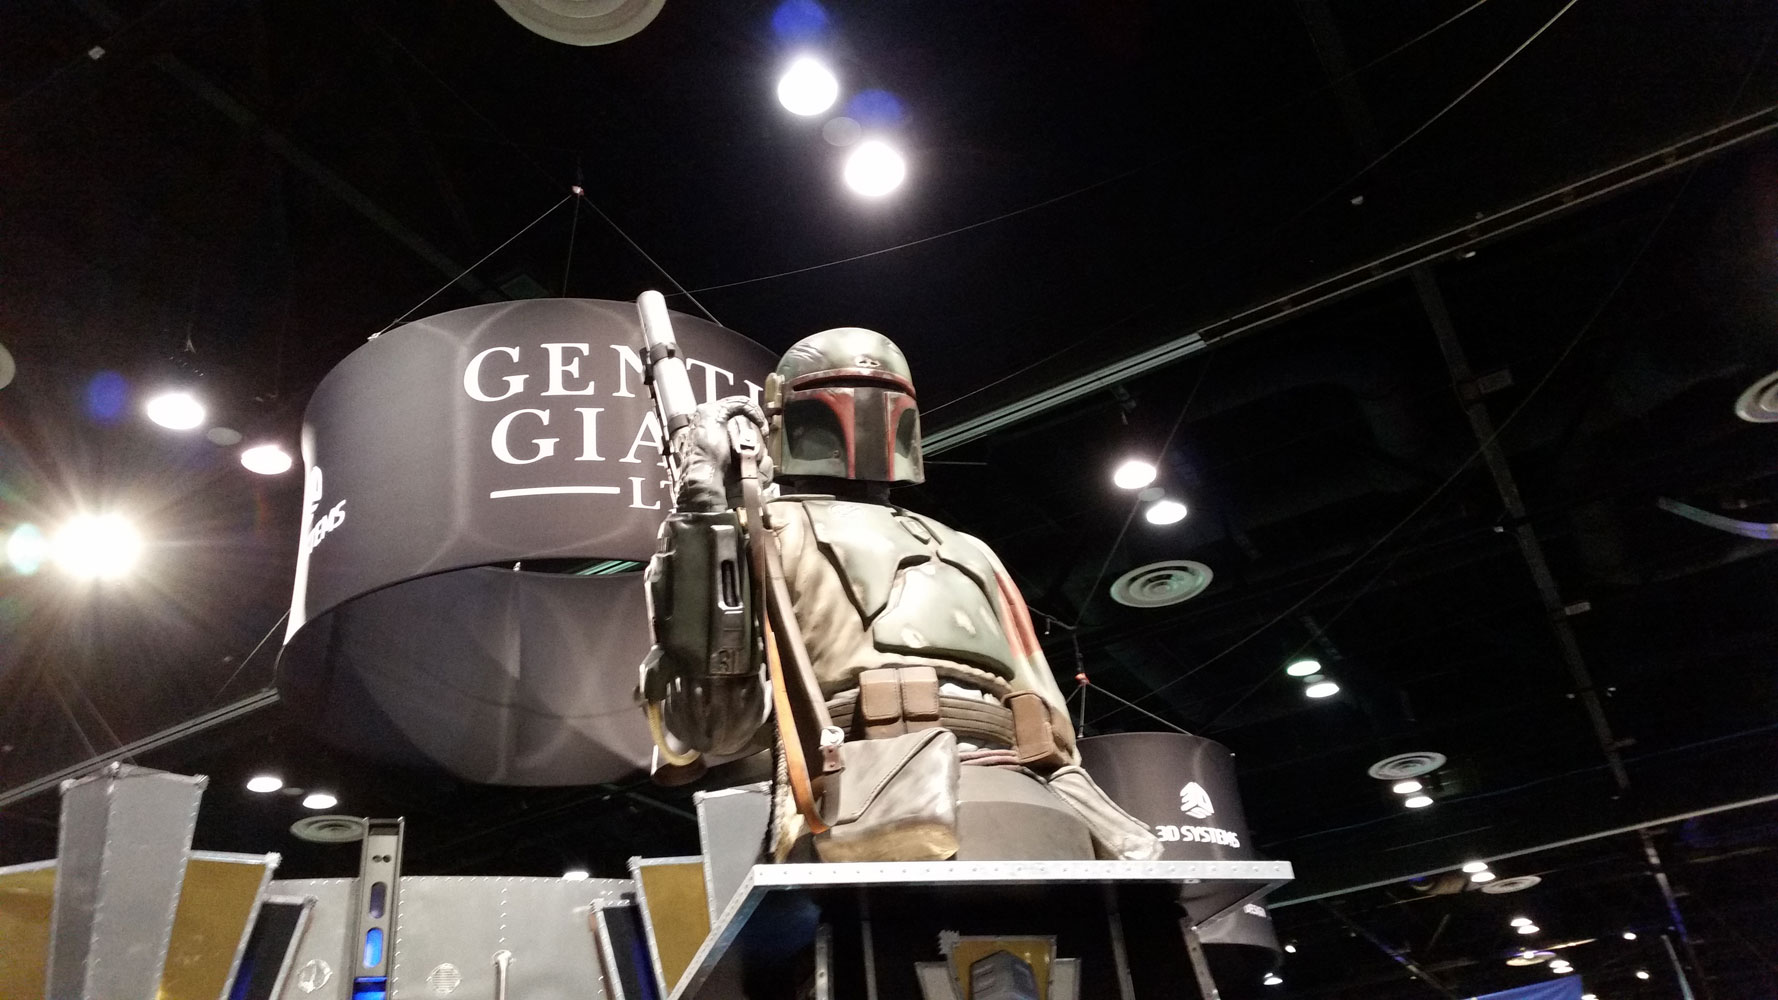 Giant Boba Fett bust watching us all